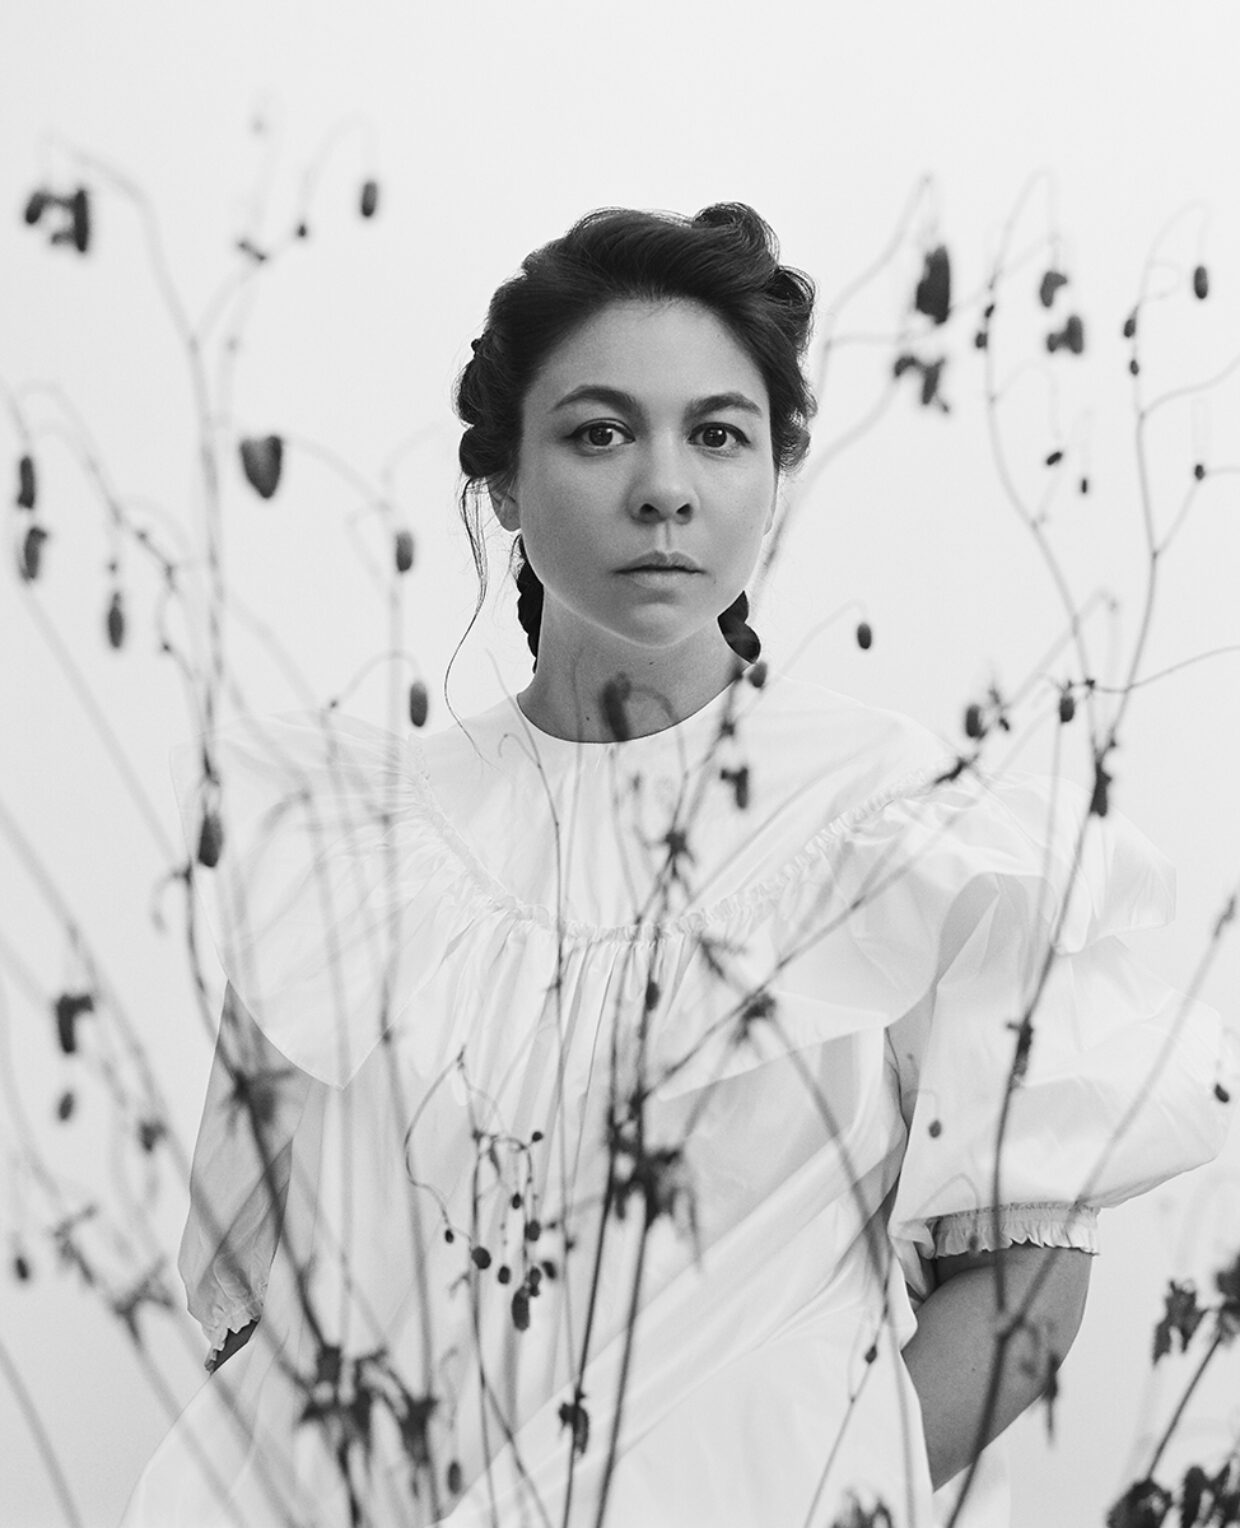 “I Want People to Feel Connected”—Simone Rocha Constructs a Beautiful, Universal World | 2